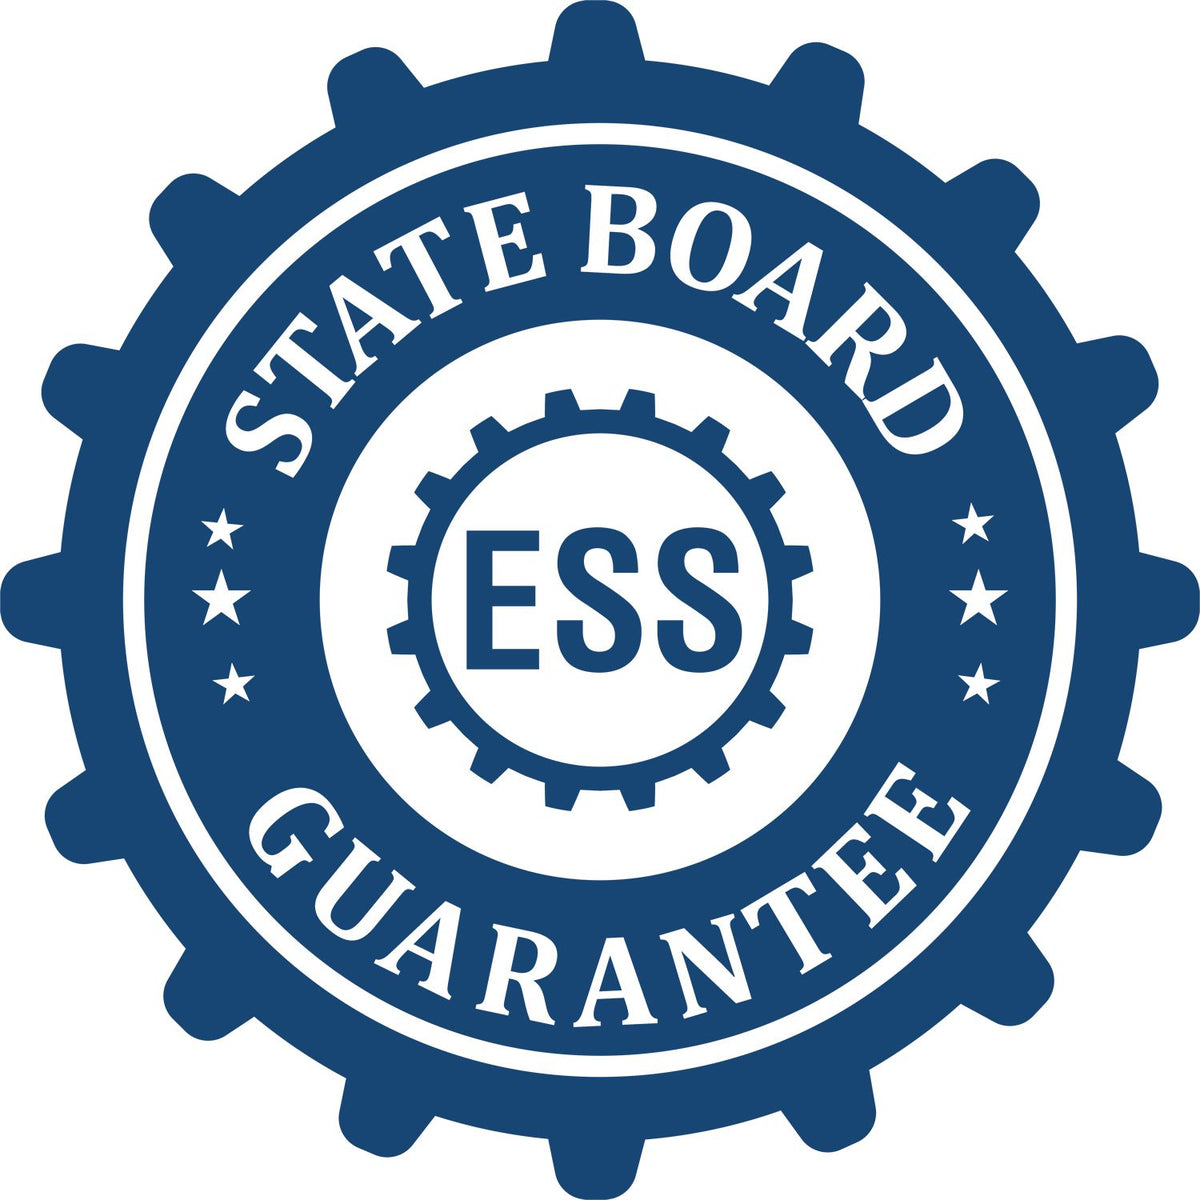 An emblem in a gear shape illustrating a state board guarantee for the Premium MaxLight Pre-Inked Ohio Landscape Architectural Stamp product.